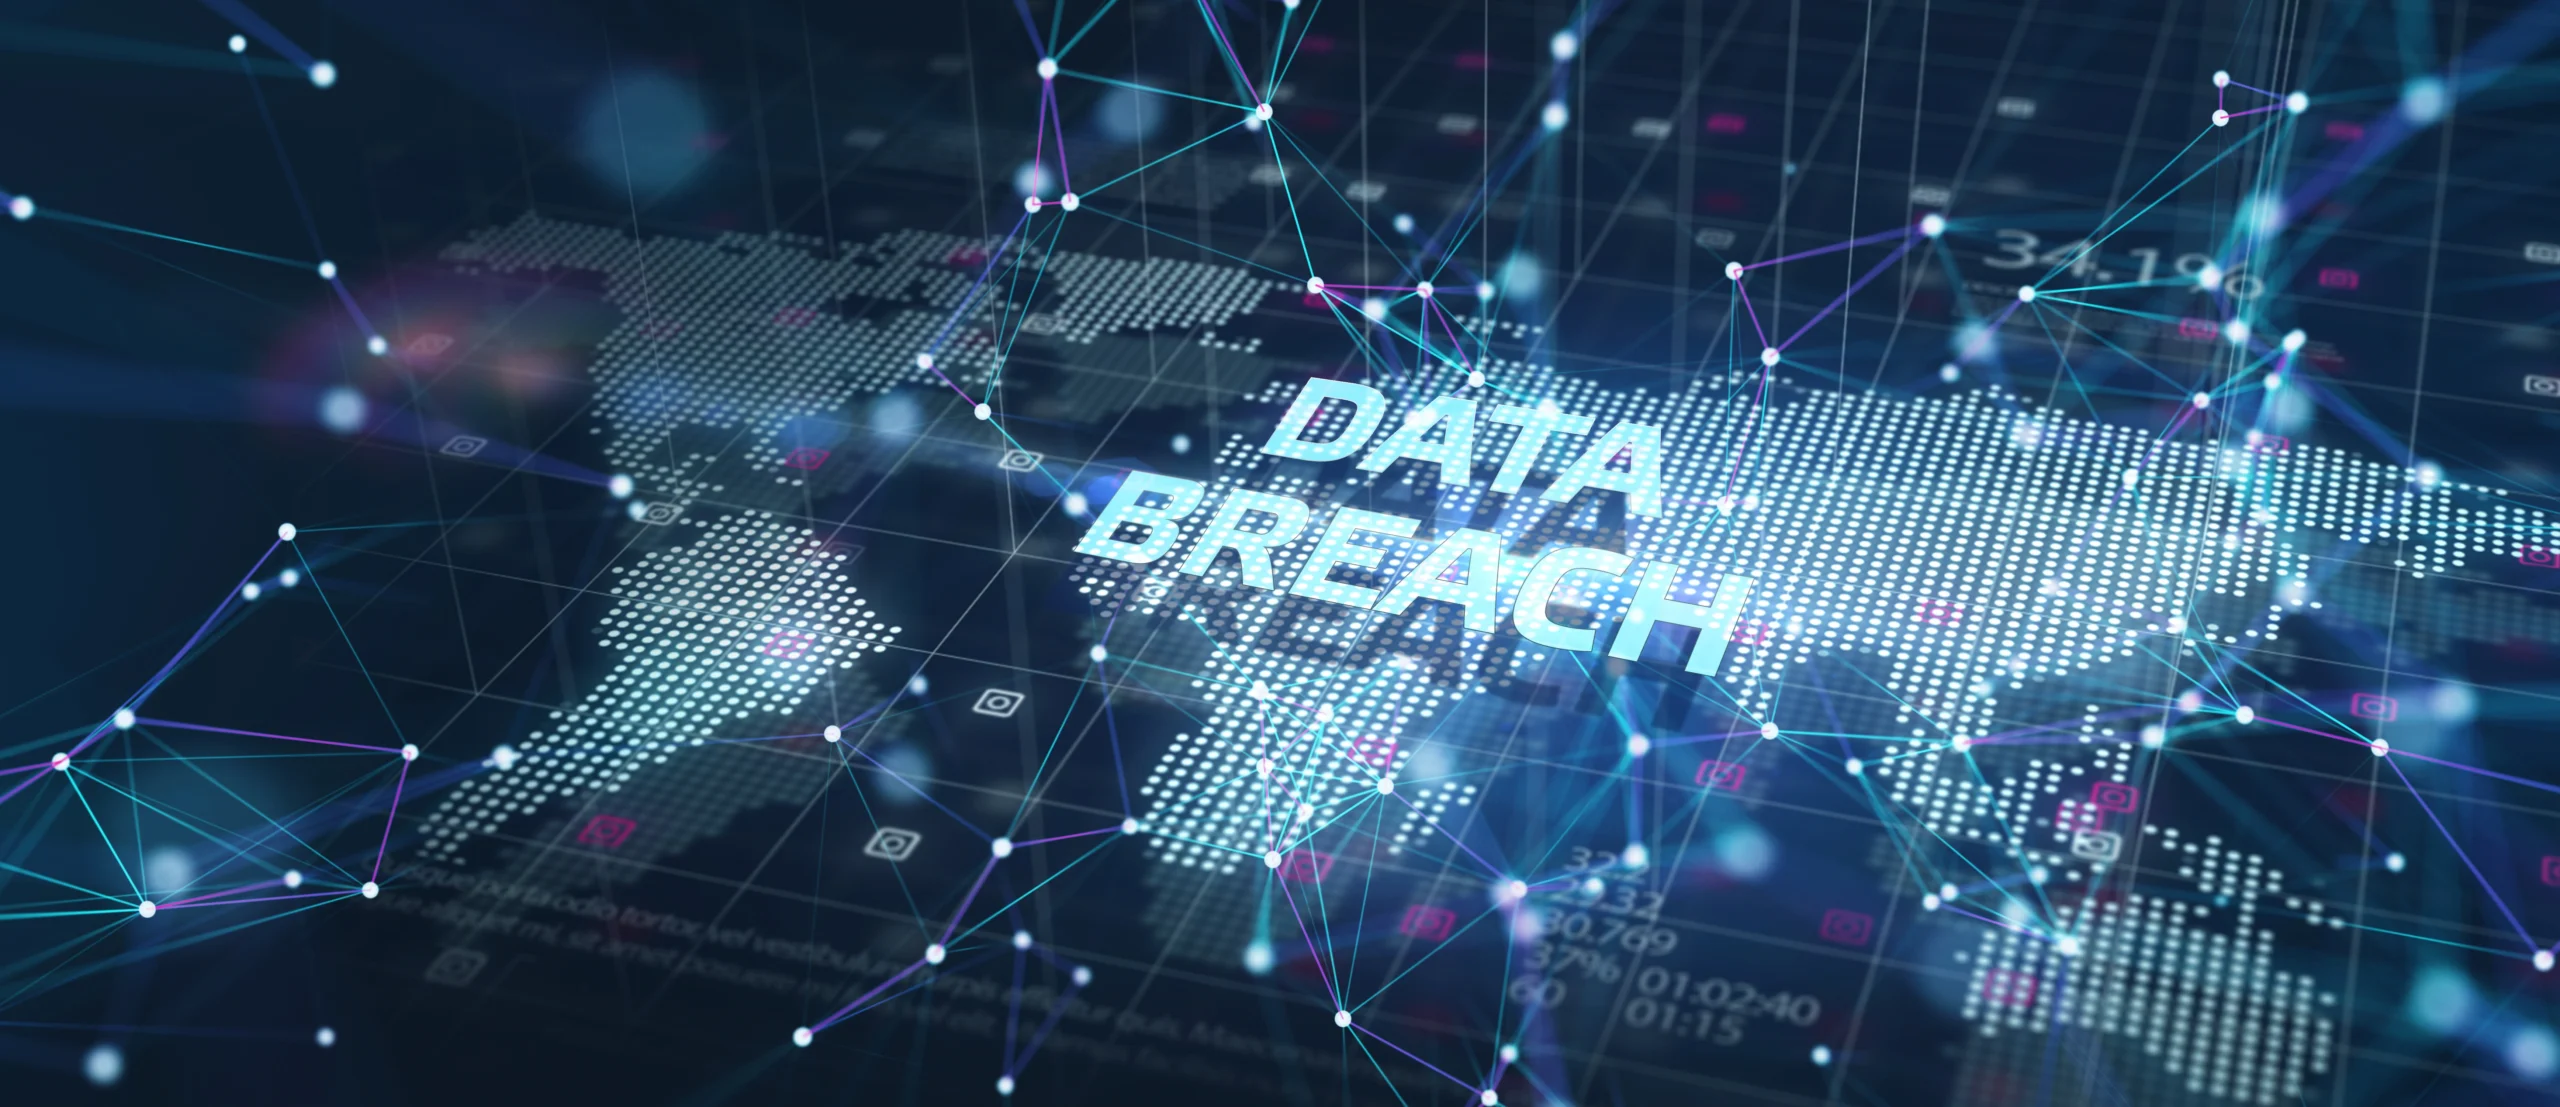 Business, technology, internet and networking concept with 'data breach' on the virtual display.